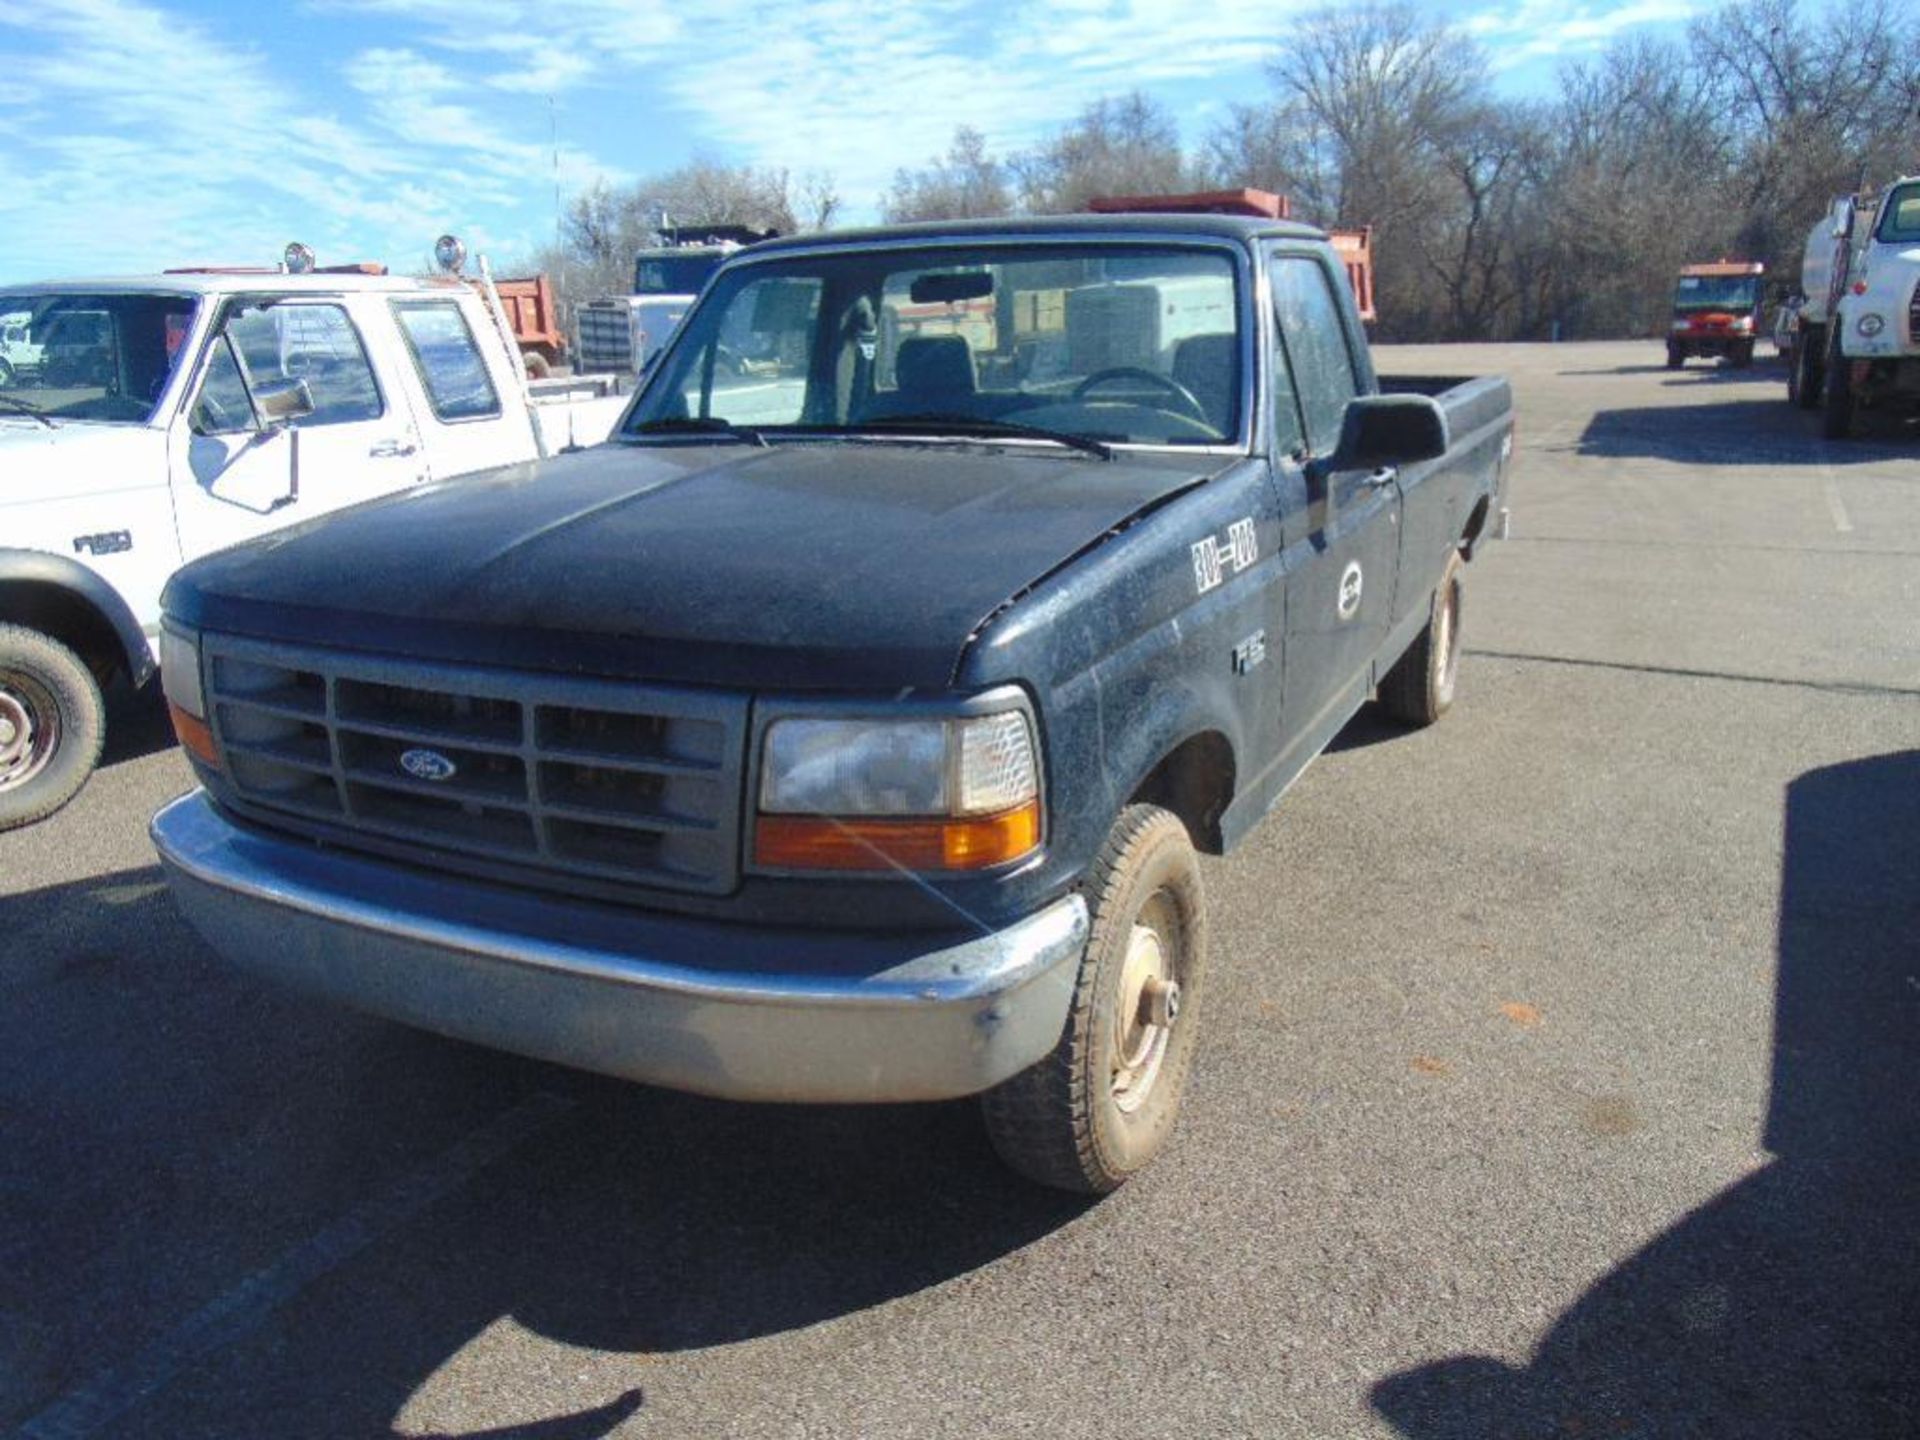 1994 Ford 4x4 Pickup s/n 1ftef14y5rna69499,300 I6 eng, auto trans, od reads 131203 miles,